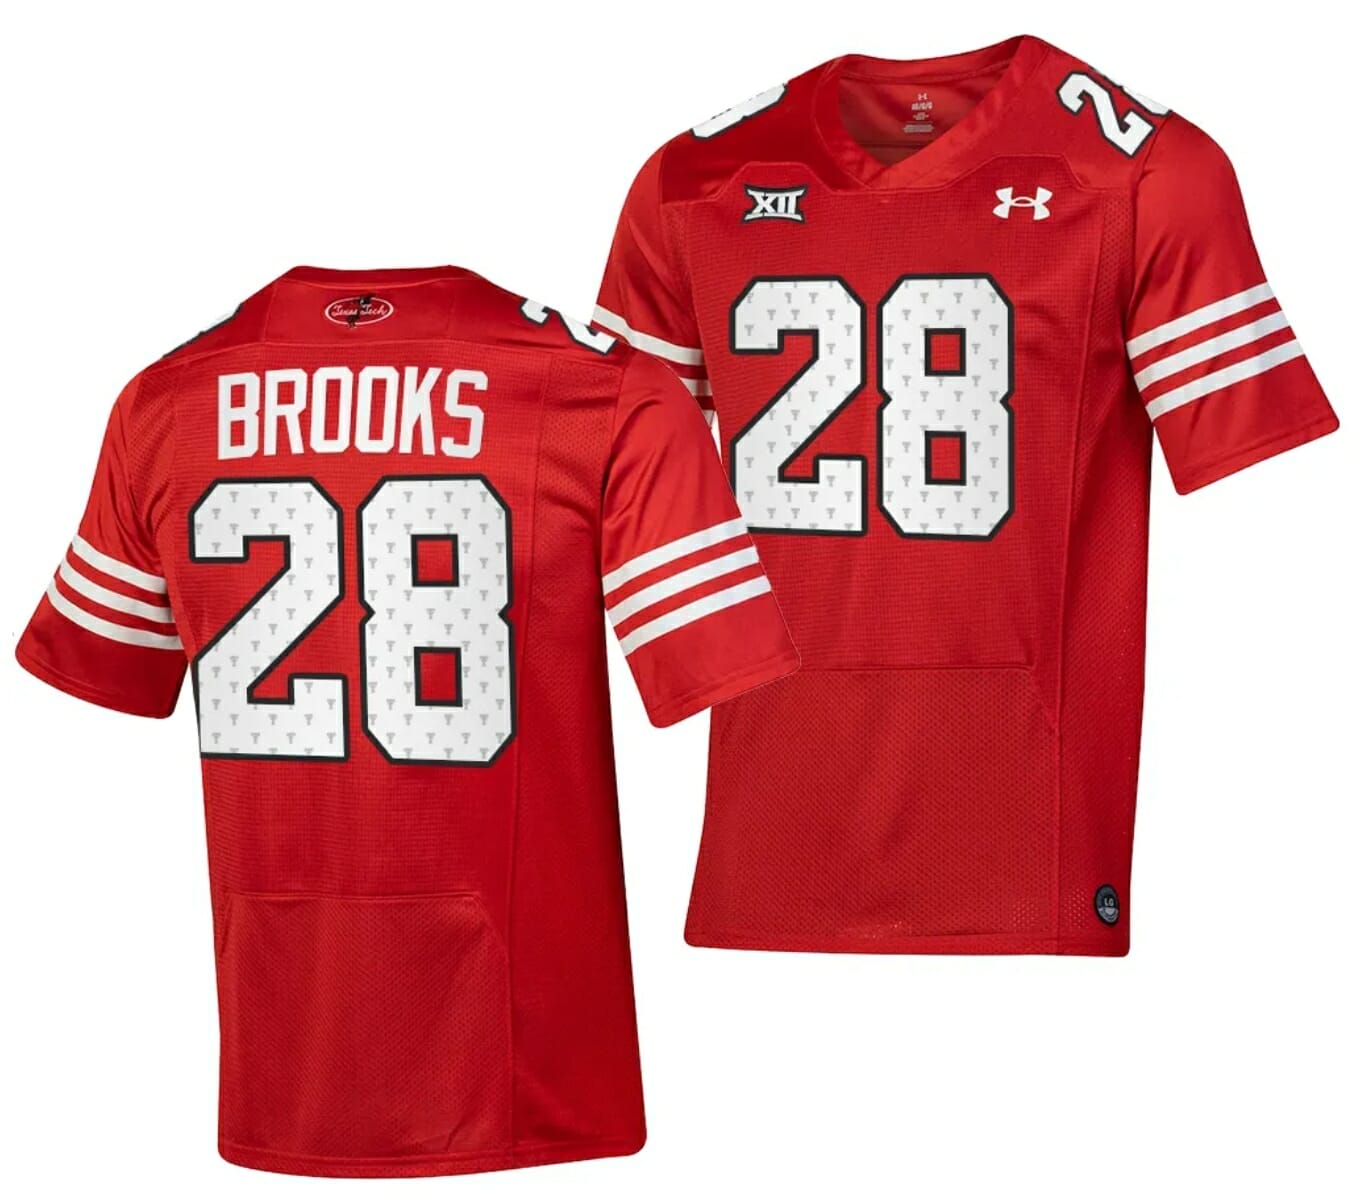 Hot] Buy New Tahj Brooks Jersey #28 Texas Tech Throwback Red